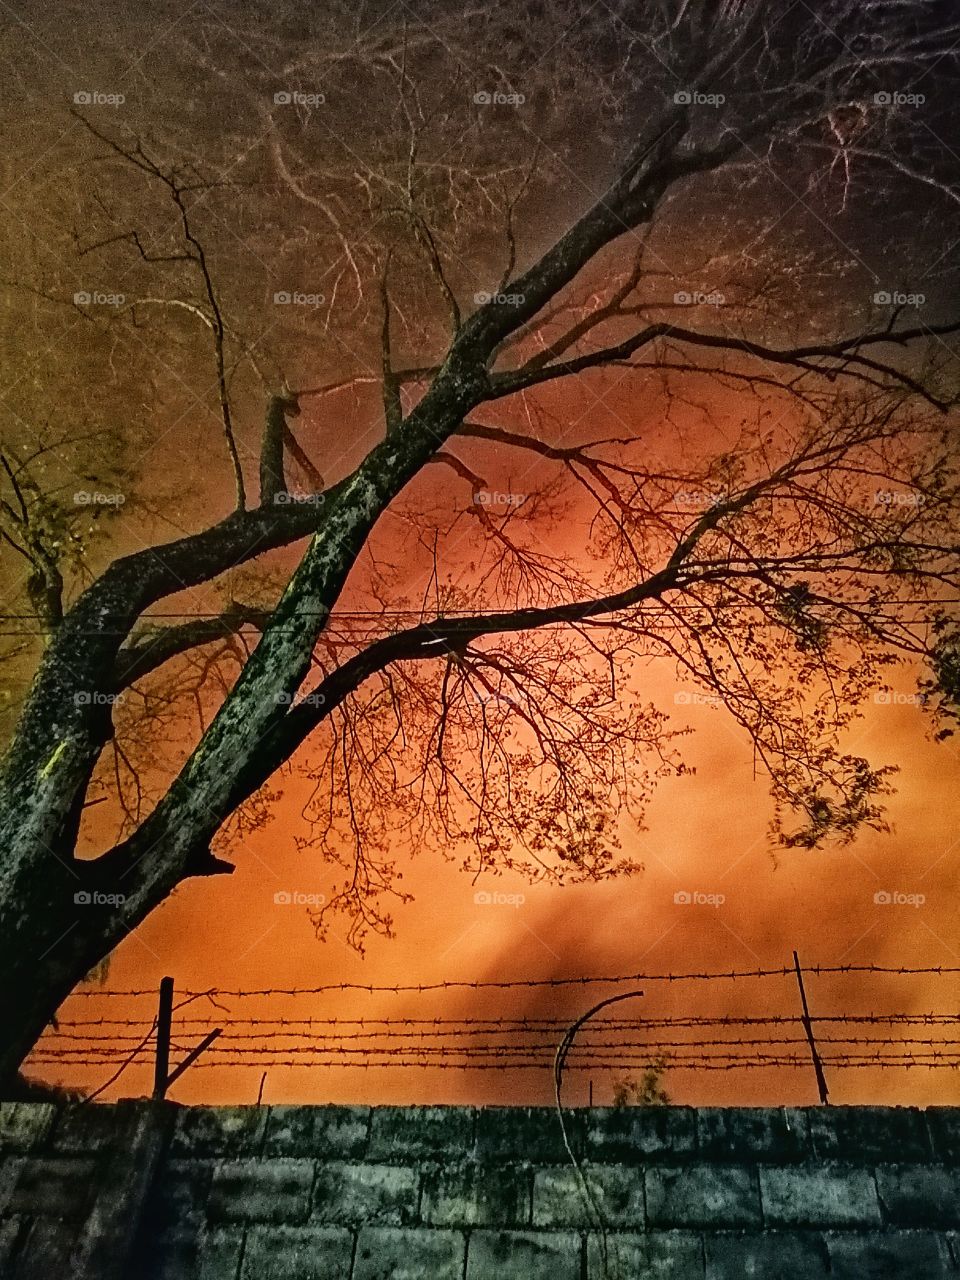 A picture showing a smoky area over the fence caused by a big fire.